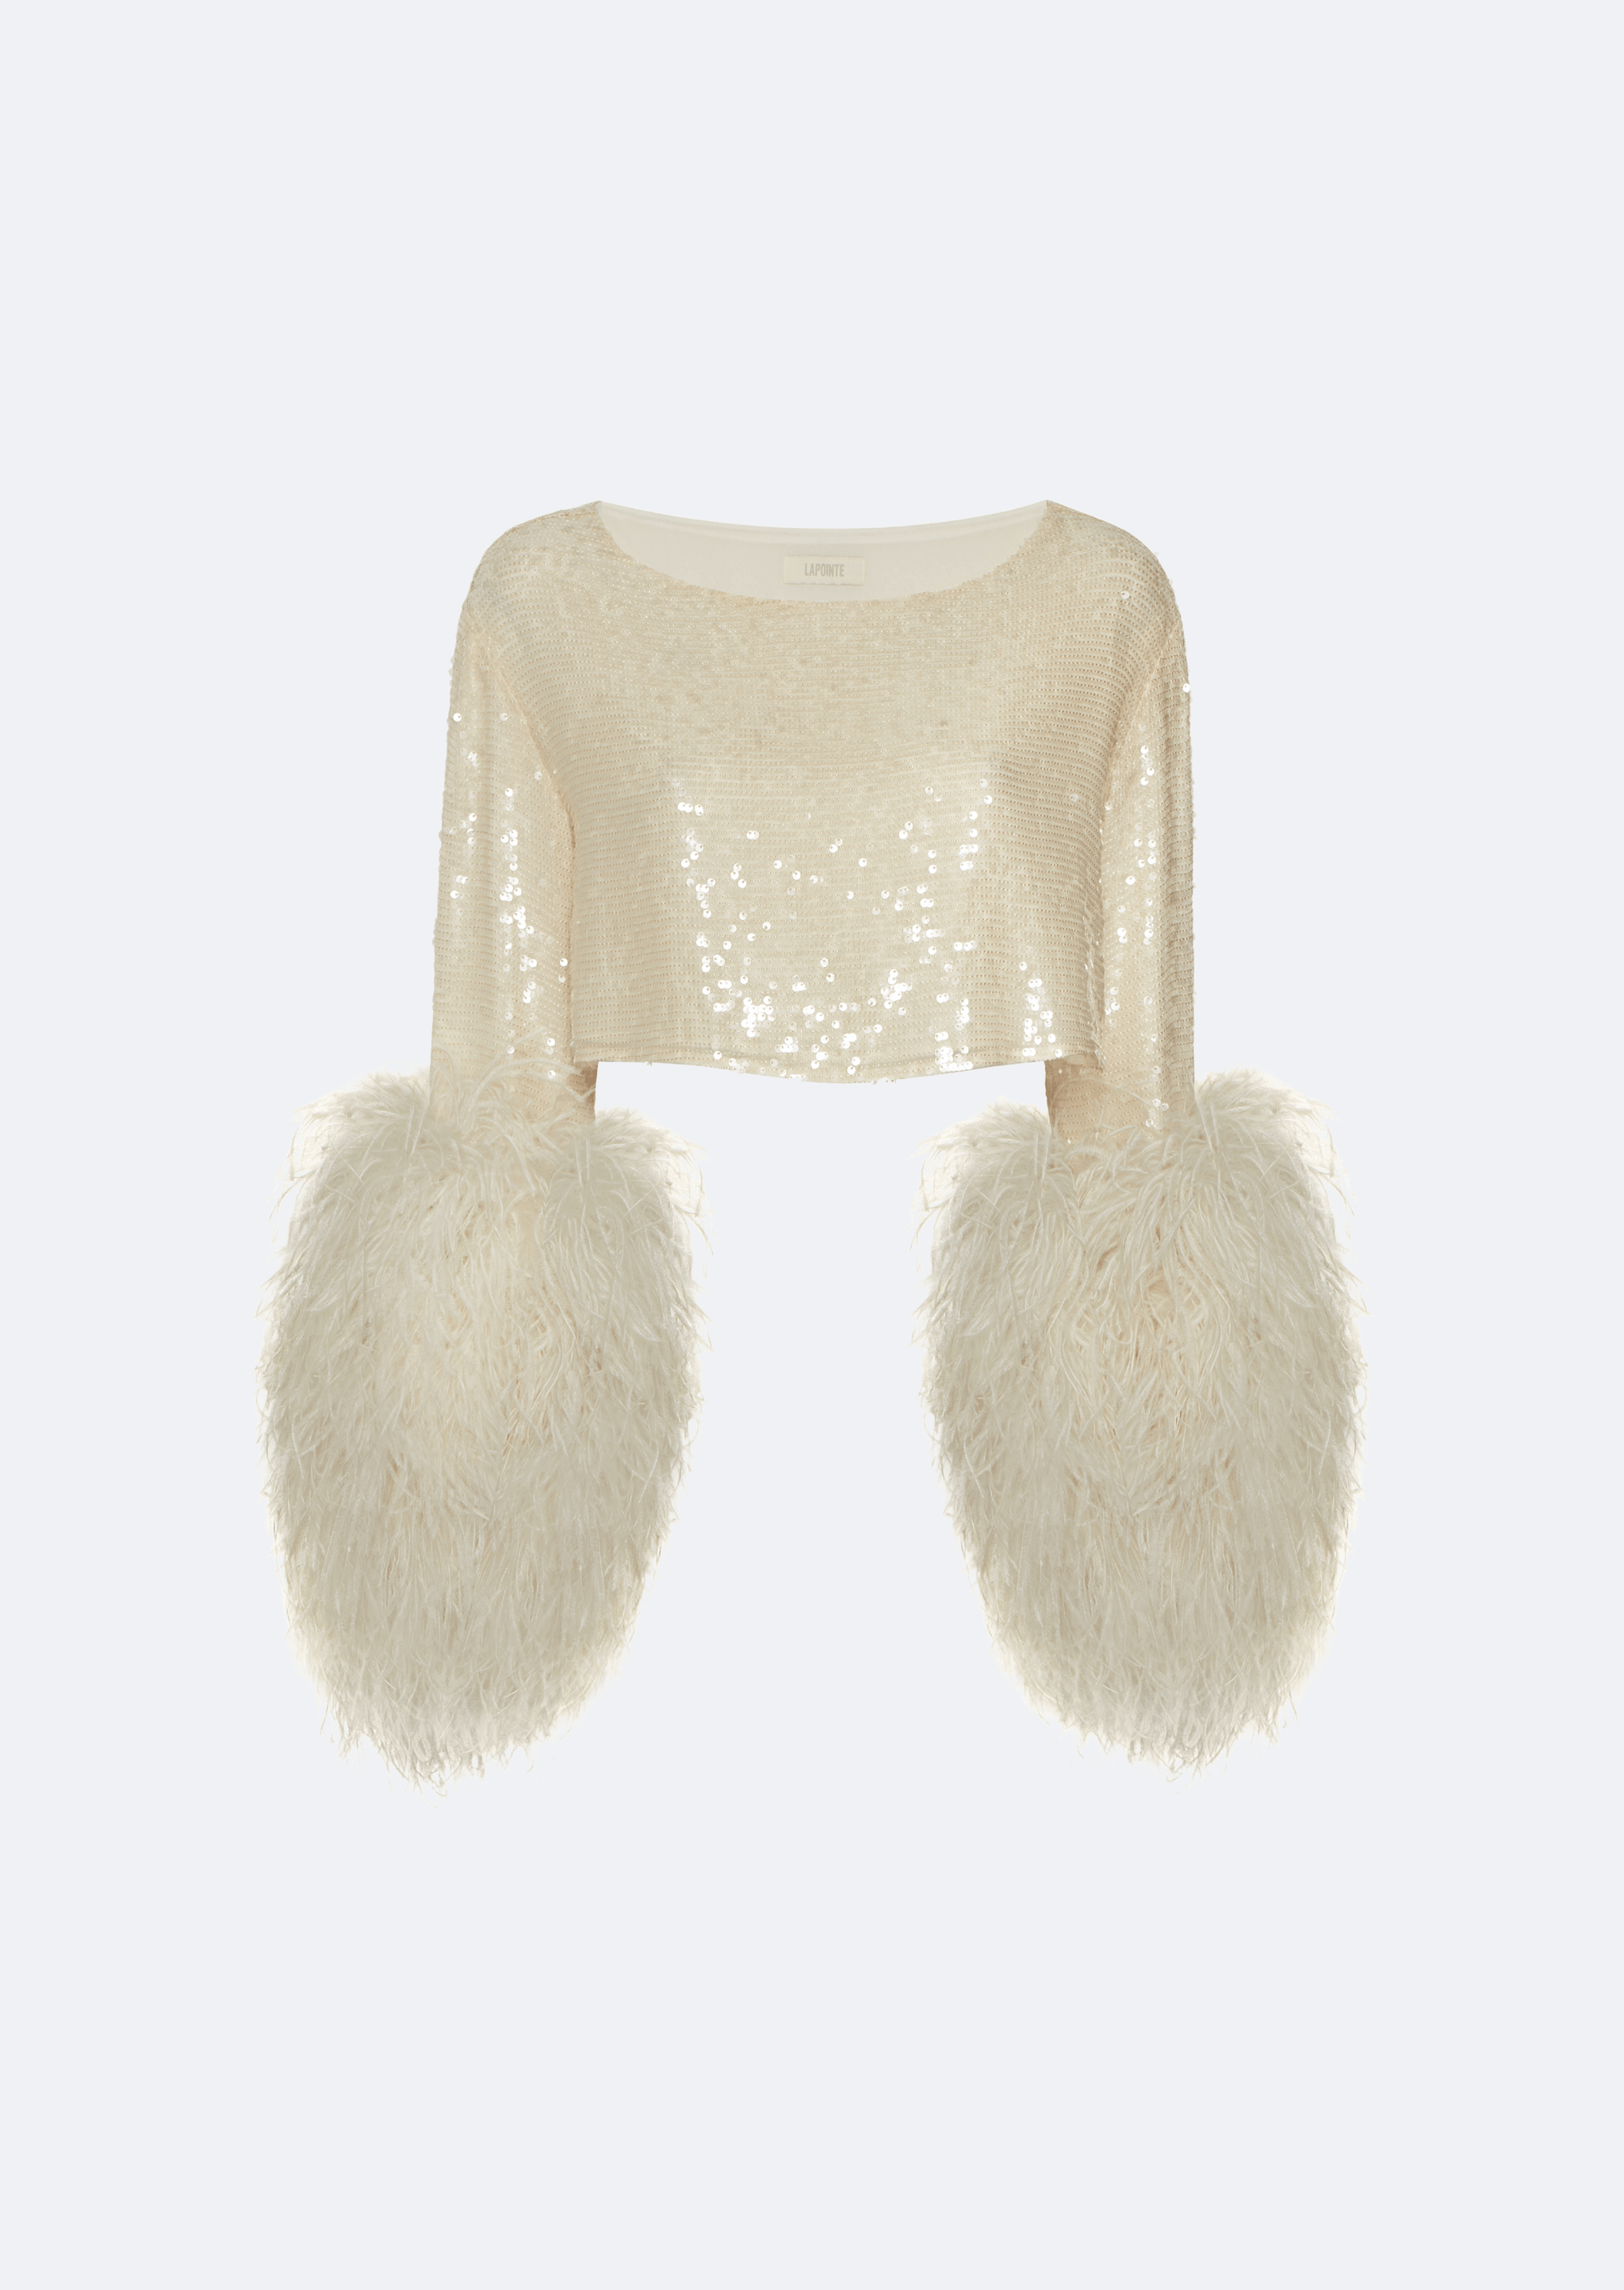 Sequin Cropped Top With Feathers - LAPOINTE